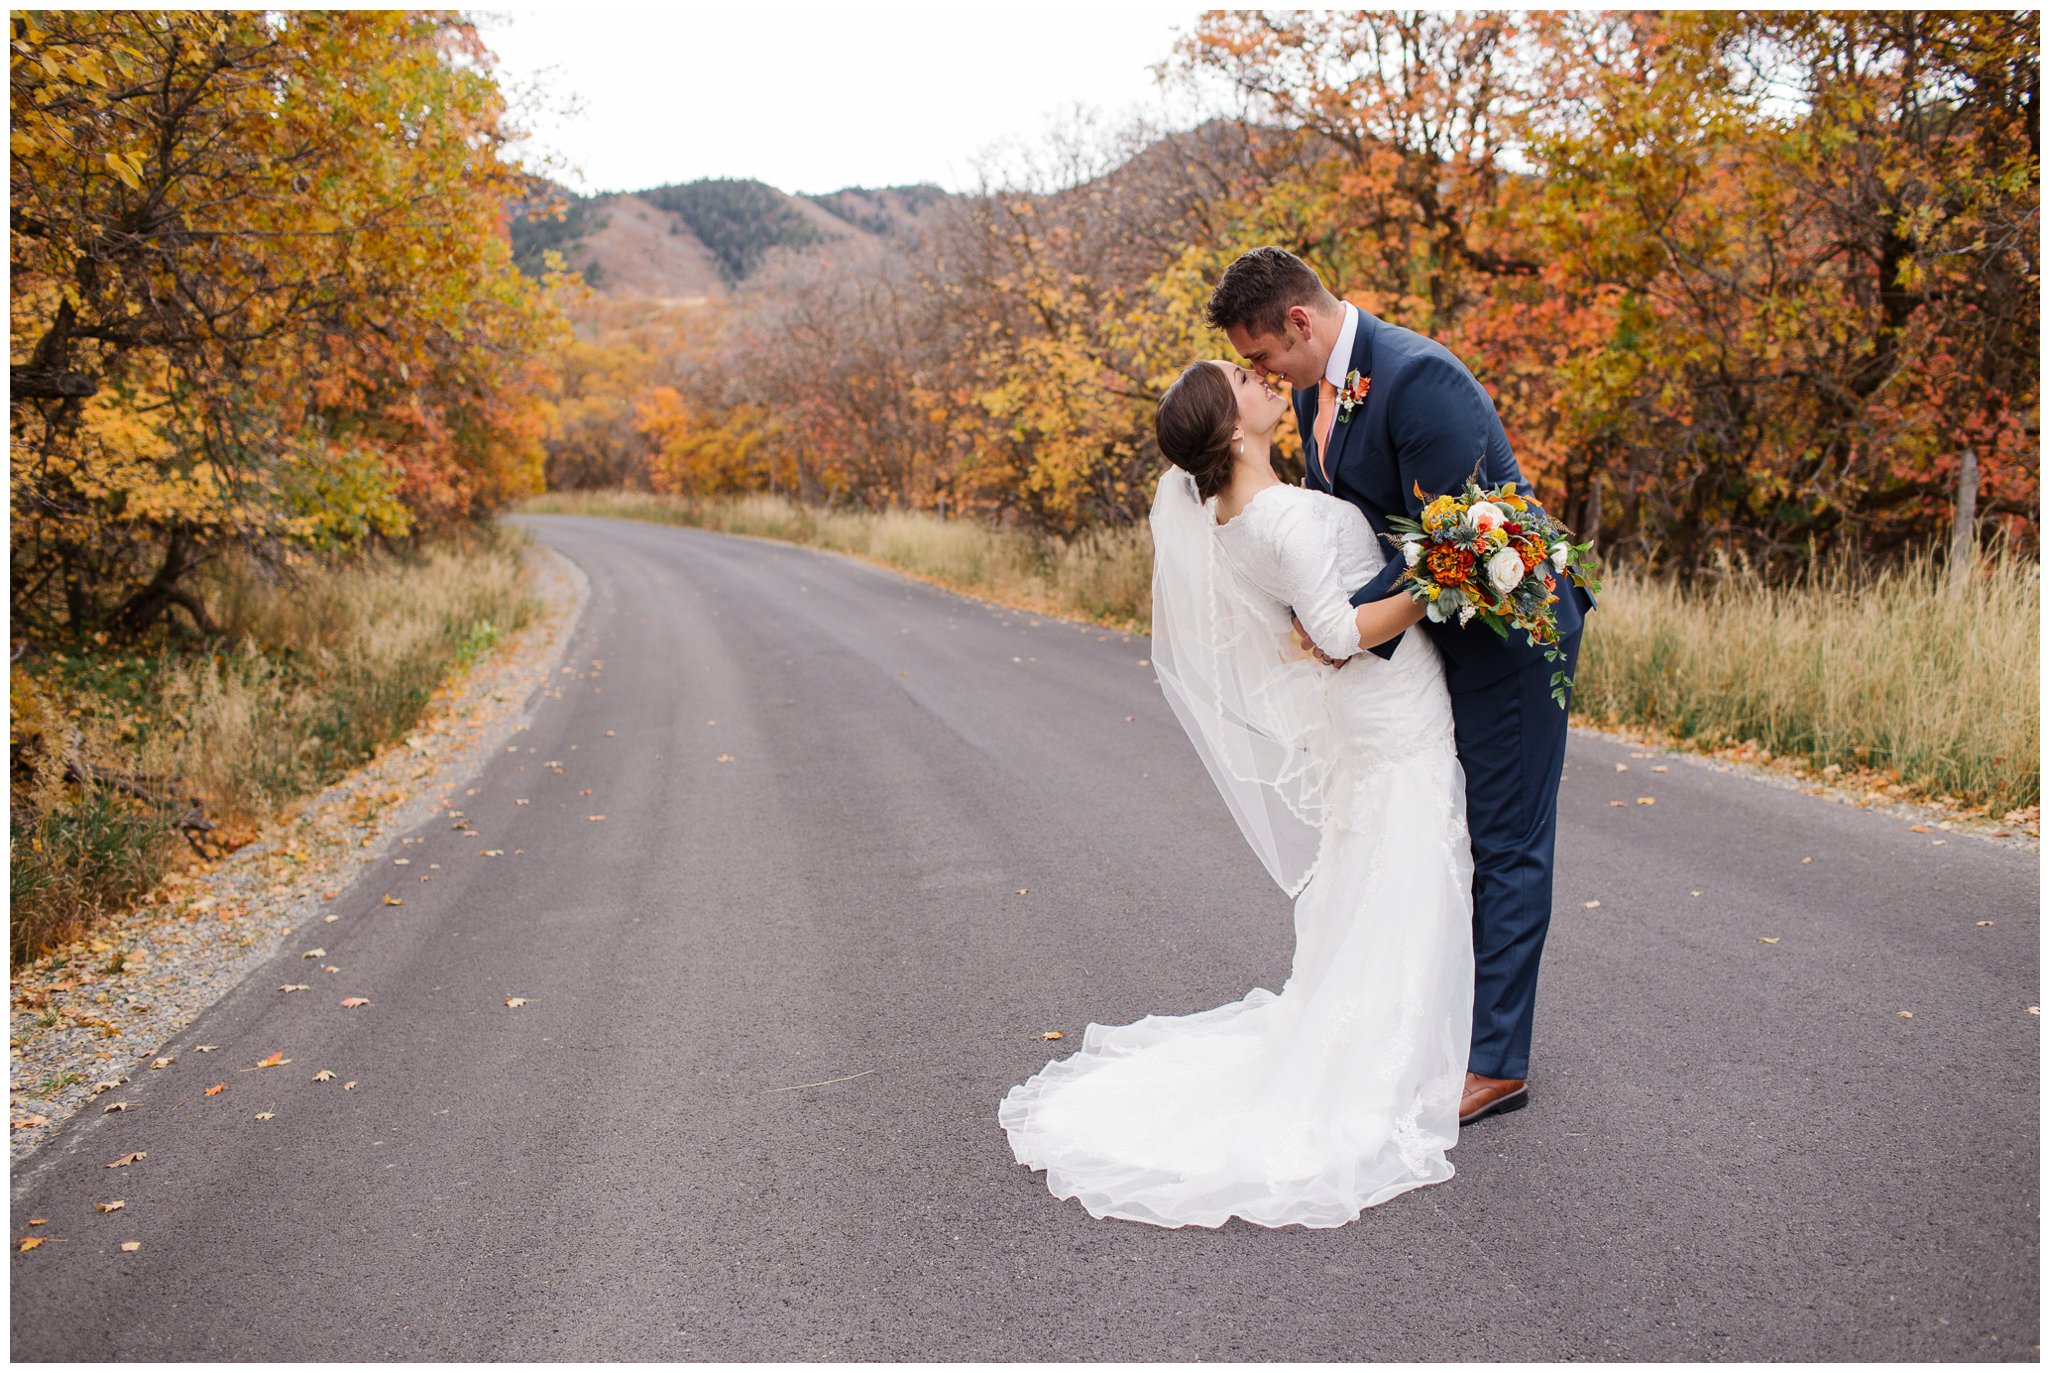 Jamie Tervort Photography | Colton and Avonlea Formals, Payson Utah Temple, LDS wedding, Fall wedding, utah wedding photographer